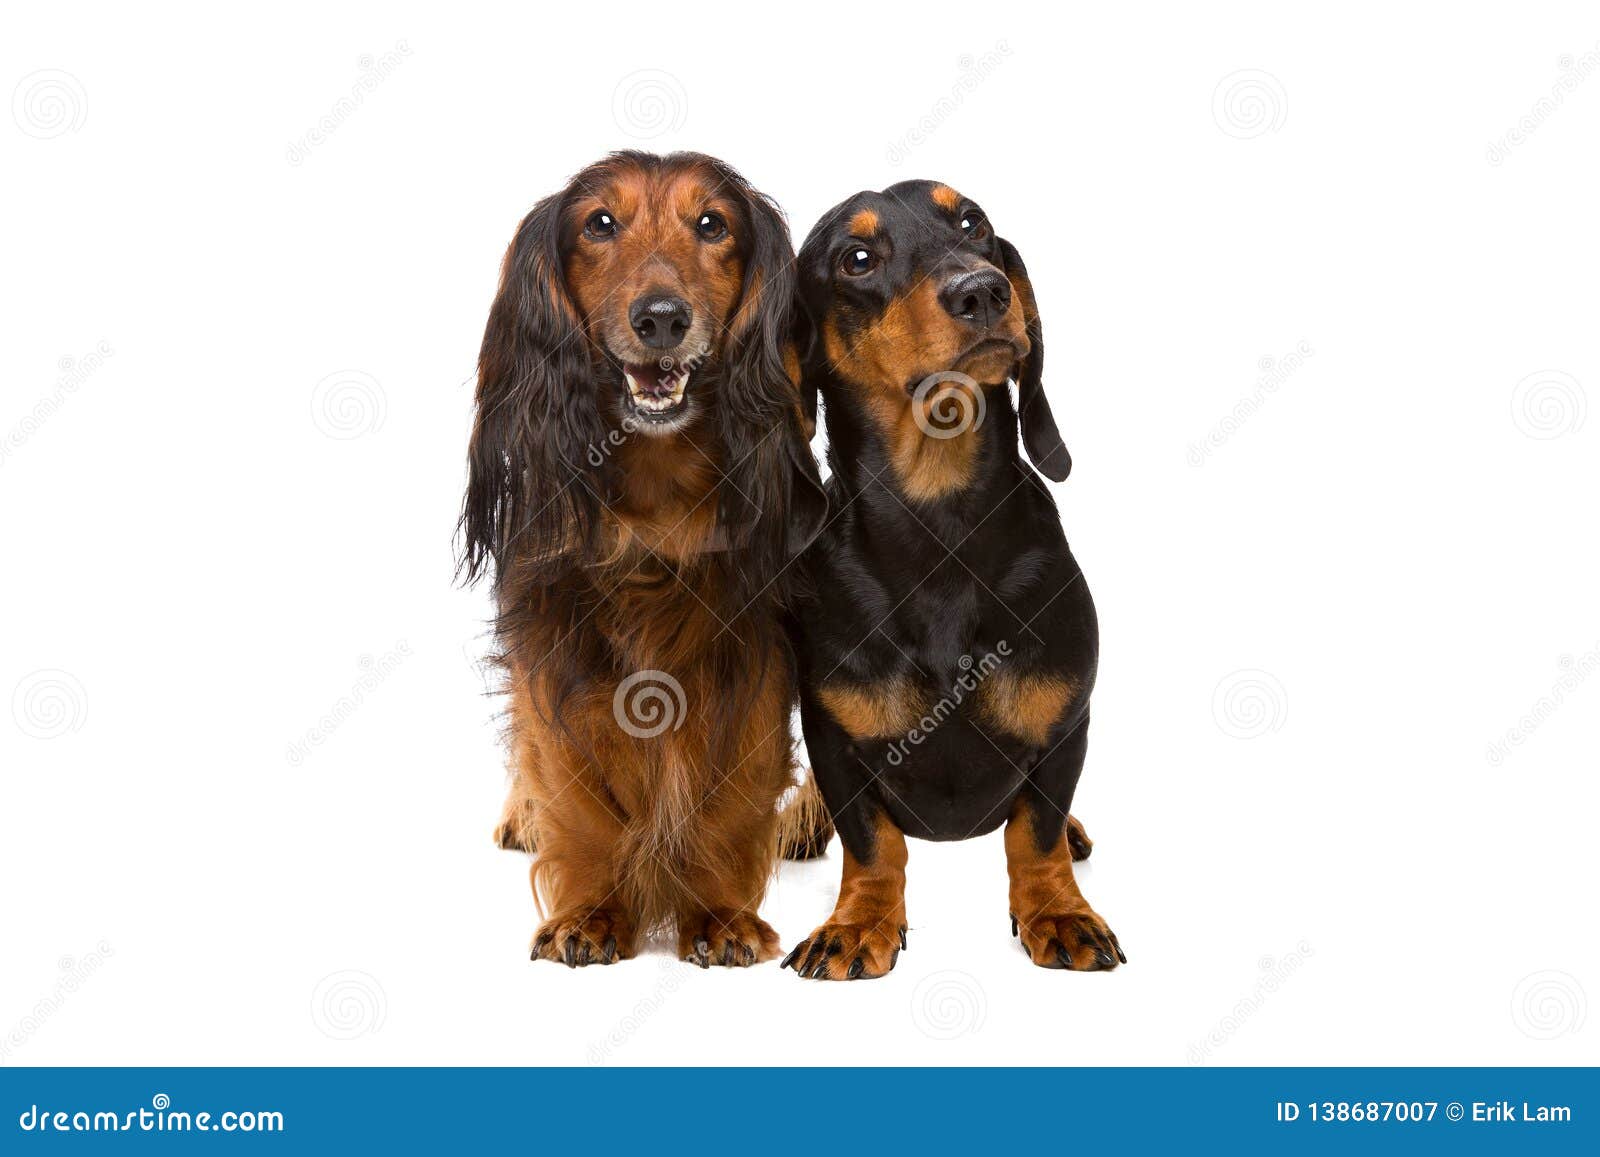 Long Haired and Short Haired Dachshund Stock Image - Image of haired,  mammal: 138687007